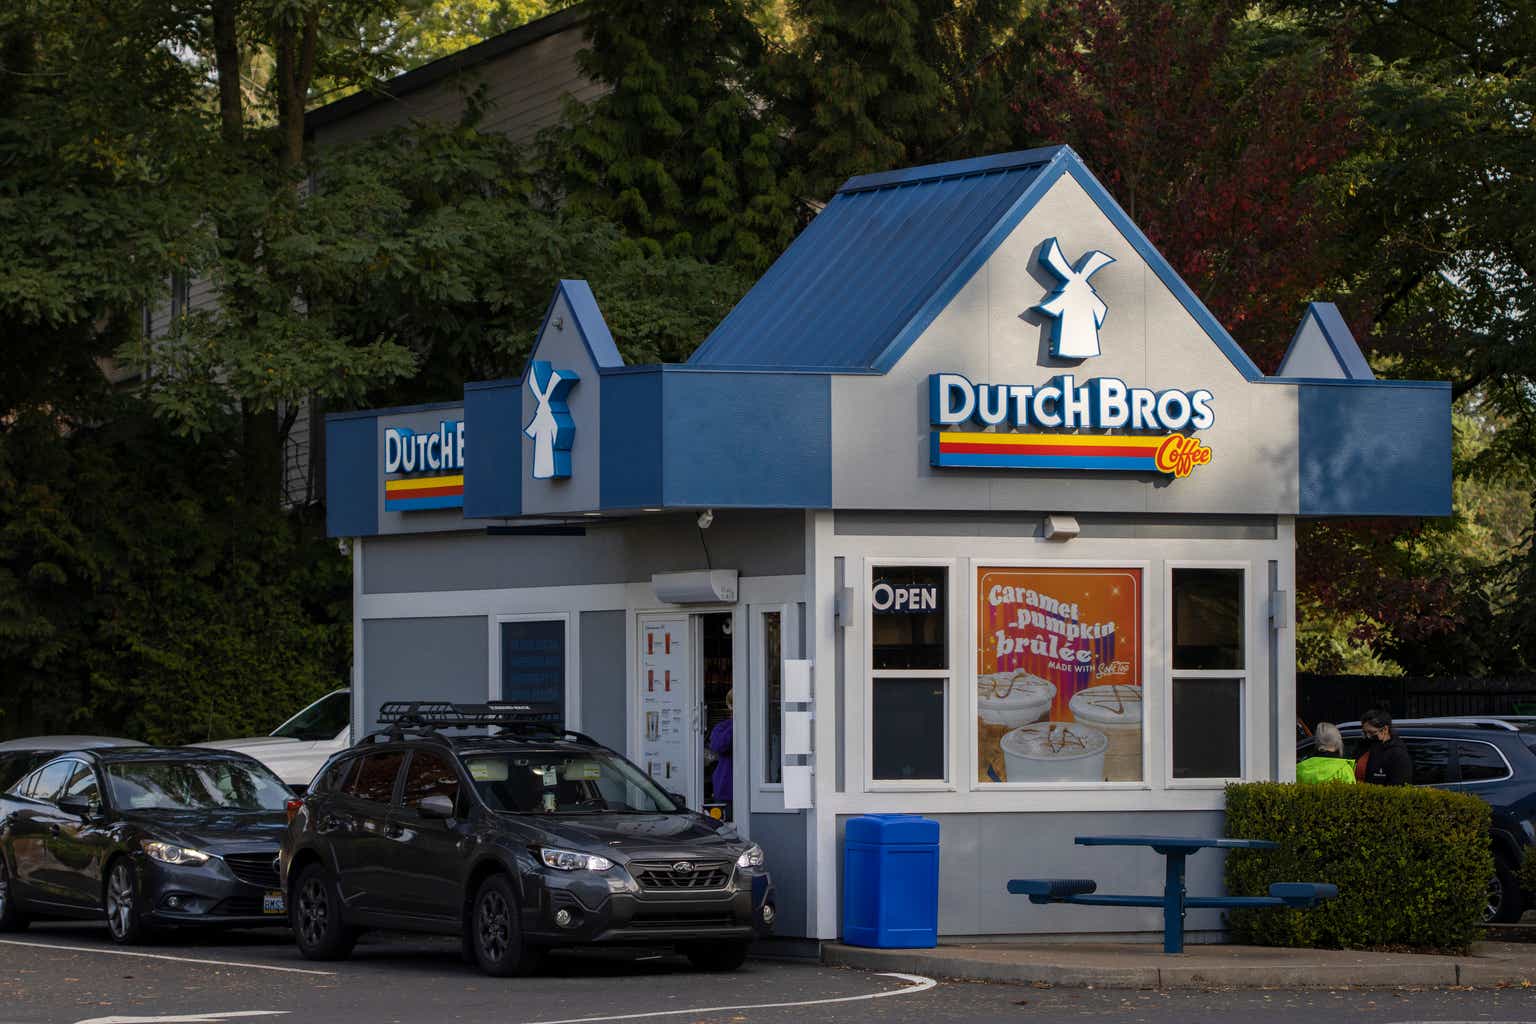 Dutch Bros: Walking A Tightrope Between Success And Struggle